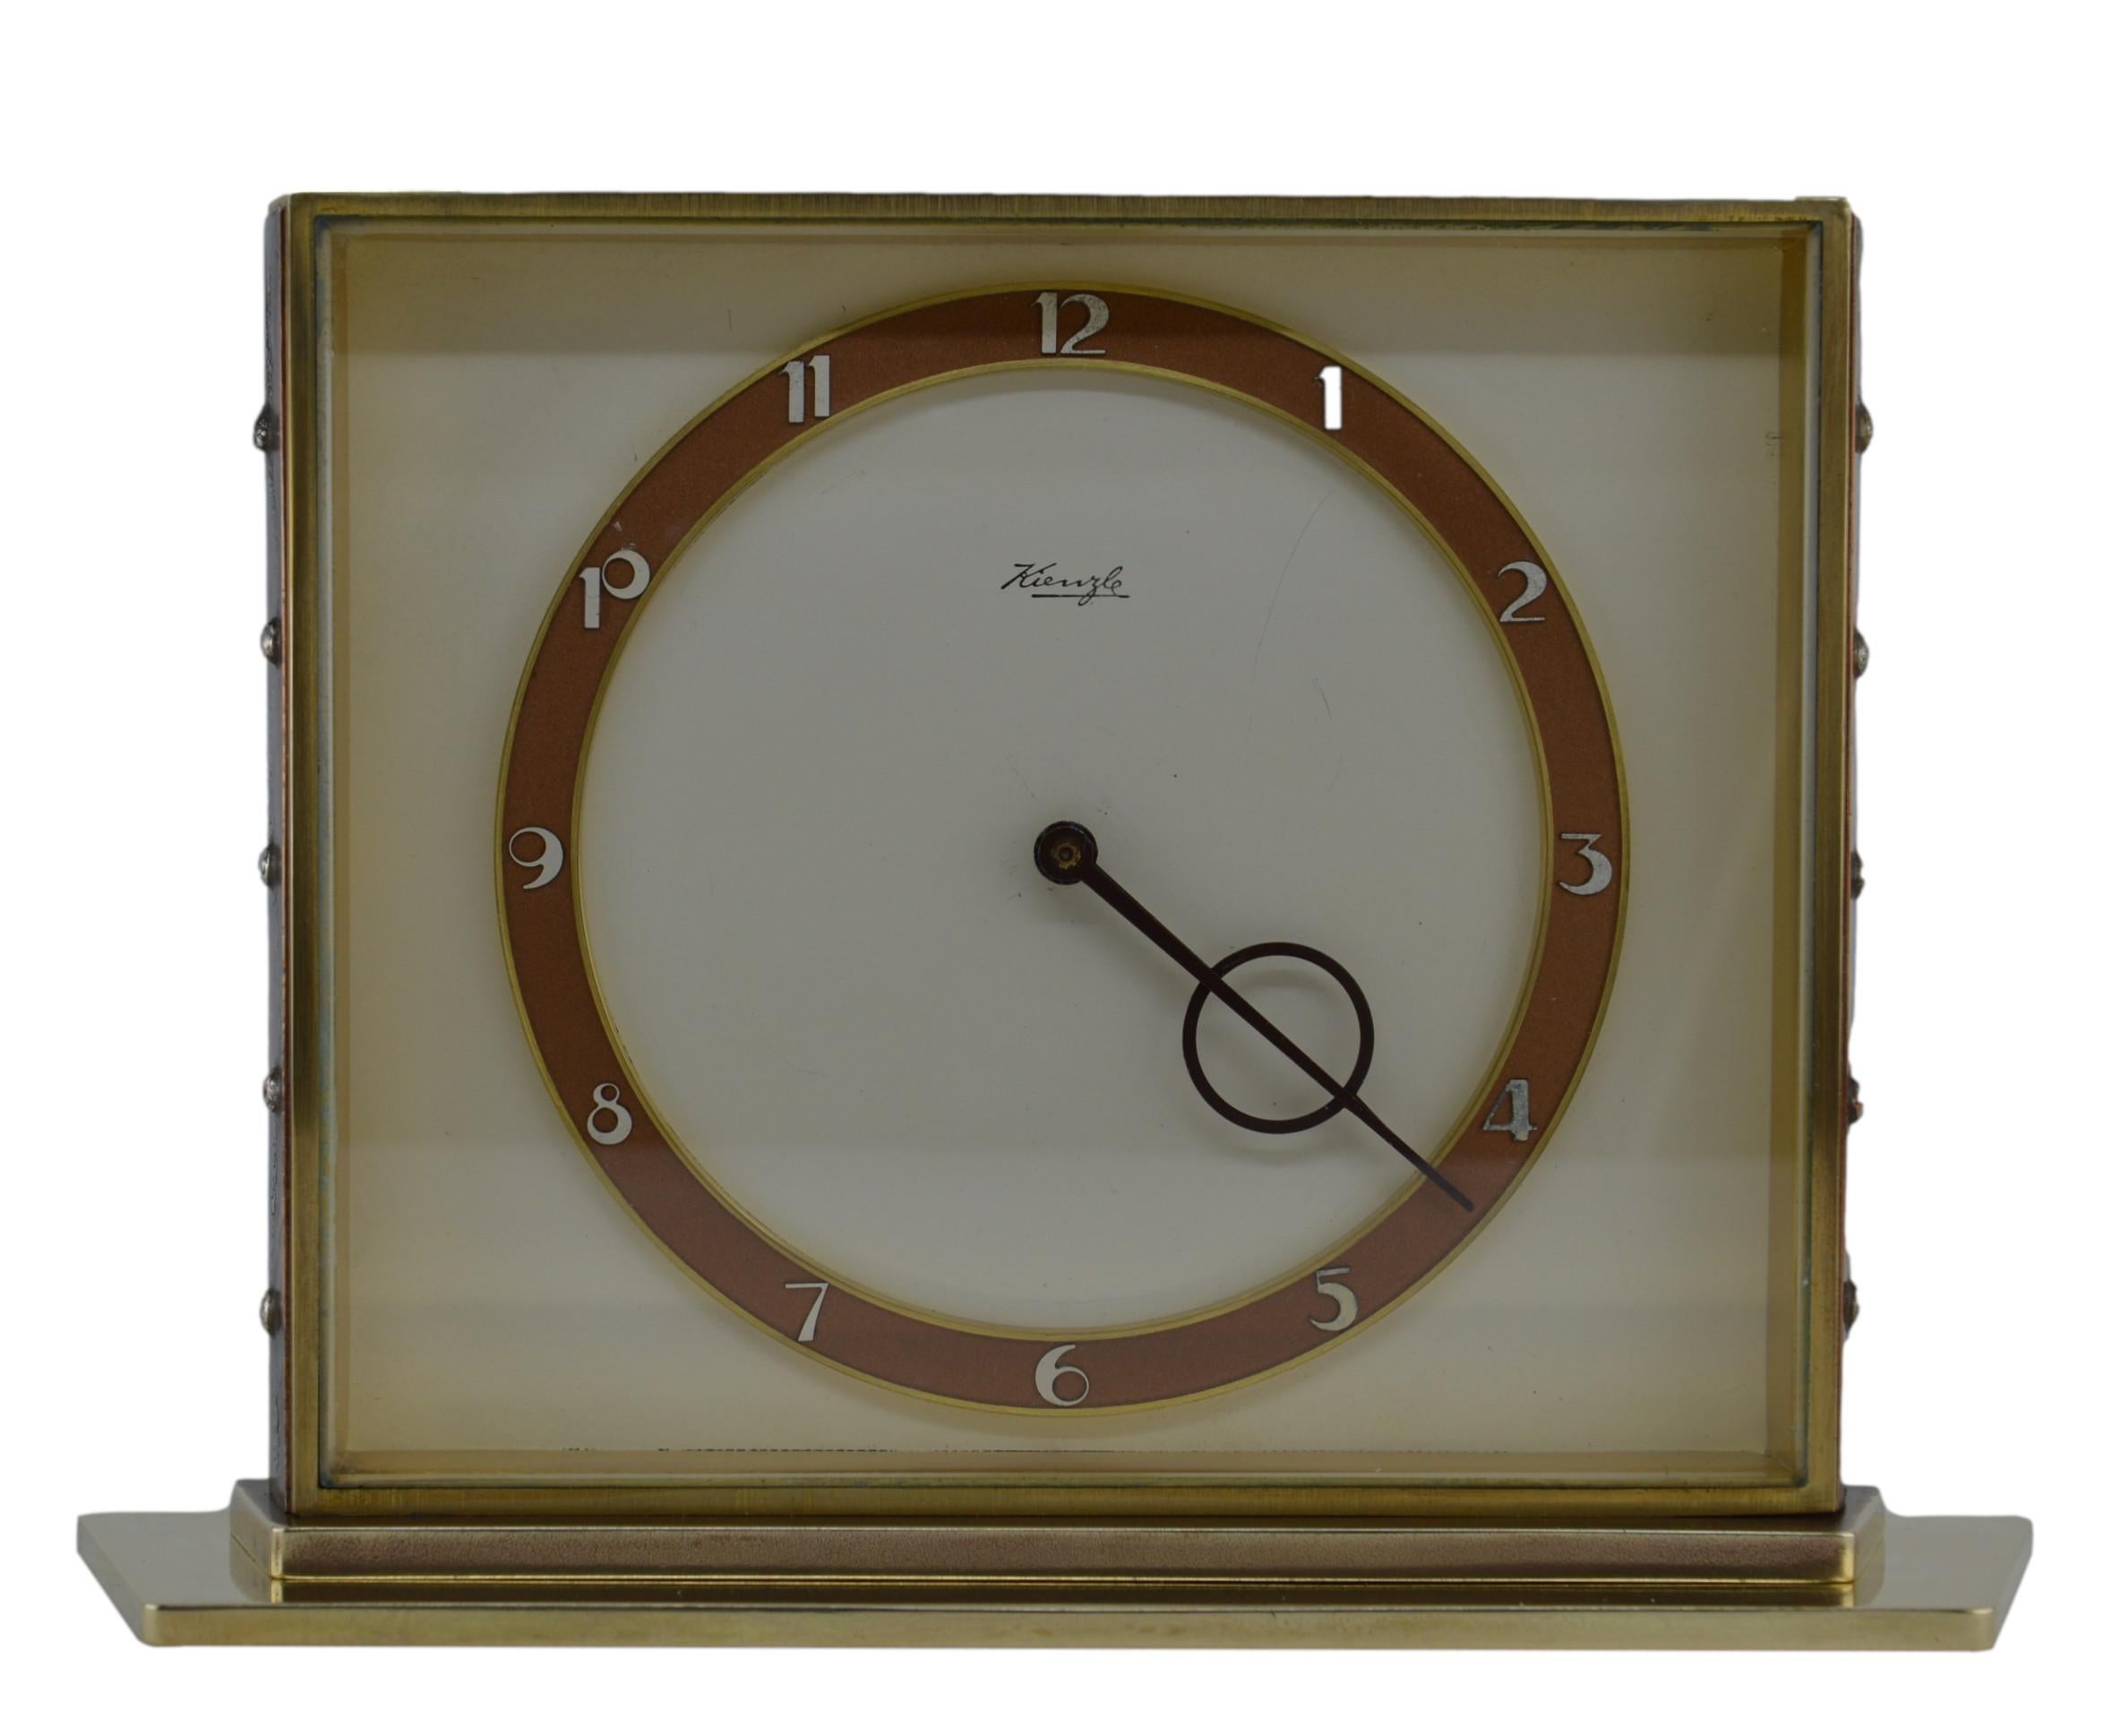 German midcentury table clock by Kienzle, Germany, 1950s. Brass and glass. Beveled front glass. 8 days movement. Measures: Height 5.1